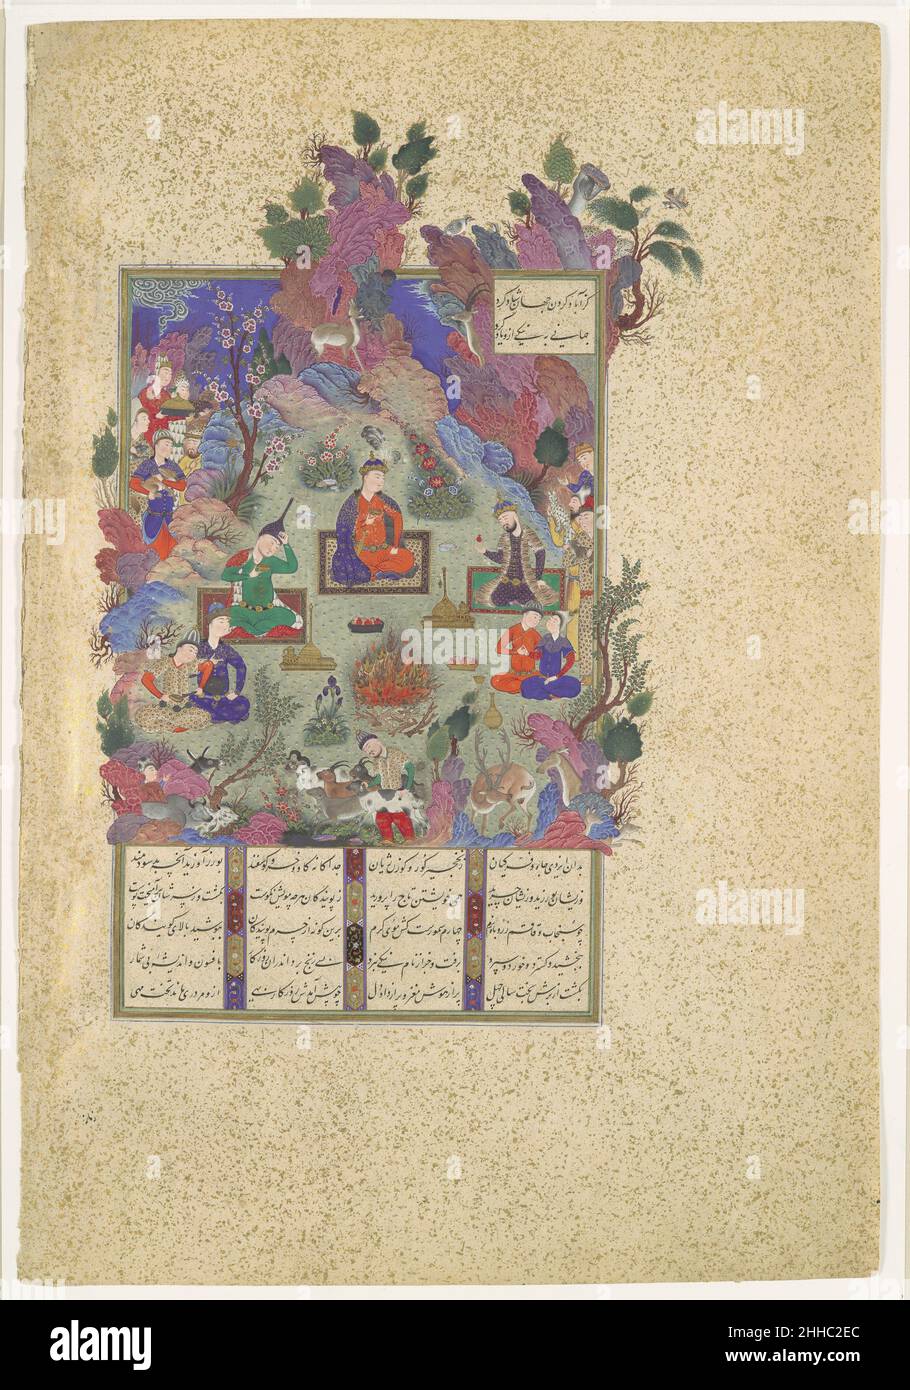 'The Feast of Sada', Folio 22v from the Shahnama (Book of Kings) of Shah Tahmasp ca. 1525 Abu'l Qasim Firdausi In the reign of Hushang, grandson of Gayumars, the world came to understand the usefulness of minerals and the arts of smithery, agriculture, and irrigation. One day, Hushang spied a dragon lurking behind the rocks. He hurled a stone at it, which missed the monster but hit a larger rock, causing sparks to fly. Realizing the significance of this phenomenon, Hushang built a large fire and held a feast to celebrate its discovery. The witty yet benevolent depictions of people and animals Stock Photo